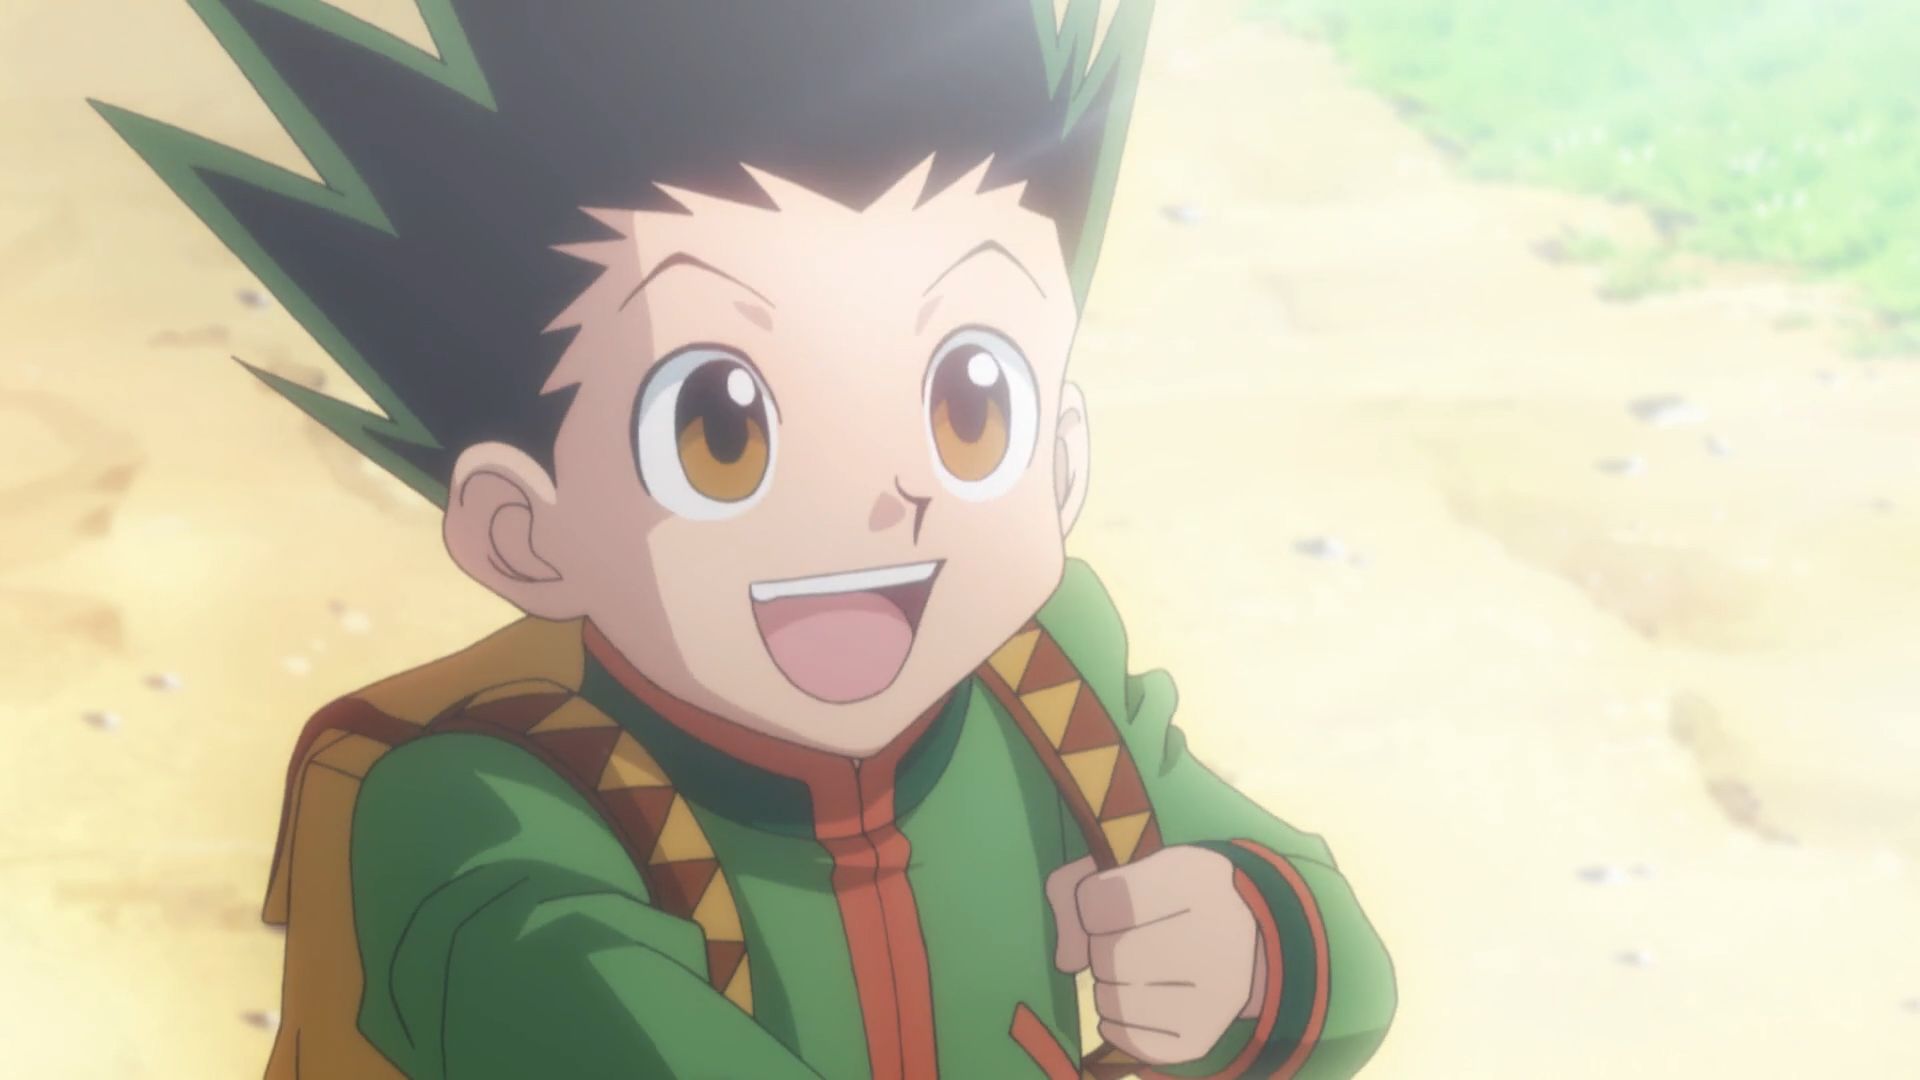 Gon Freecs from Hunter X Hunter is one of the cute anime boys.